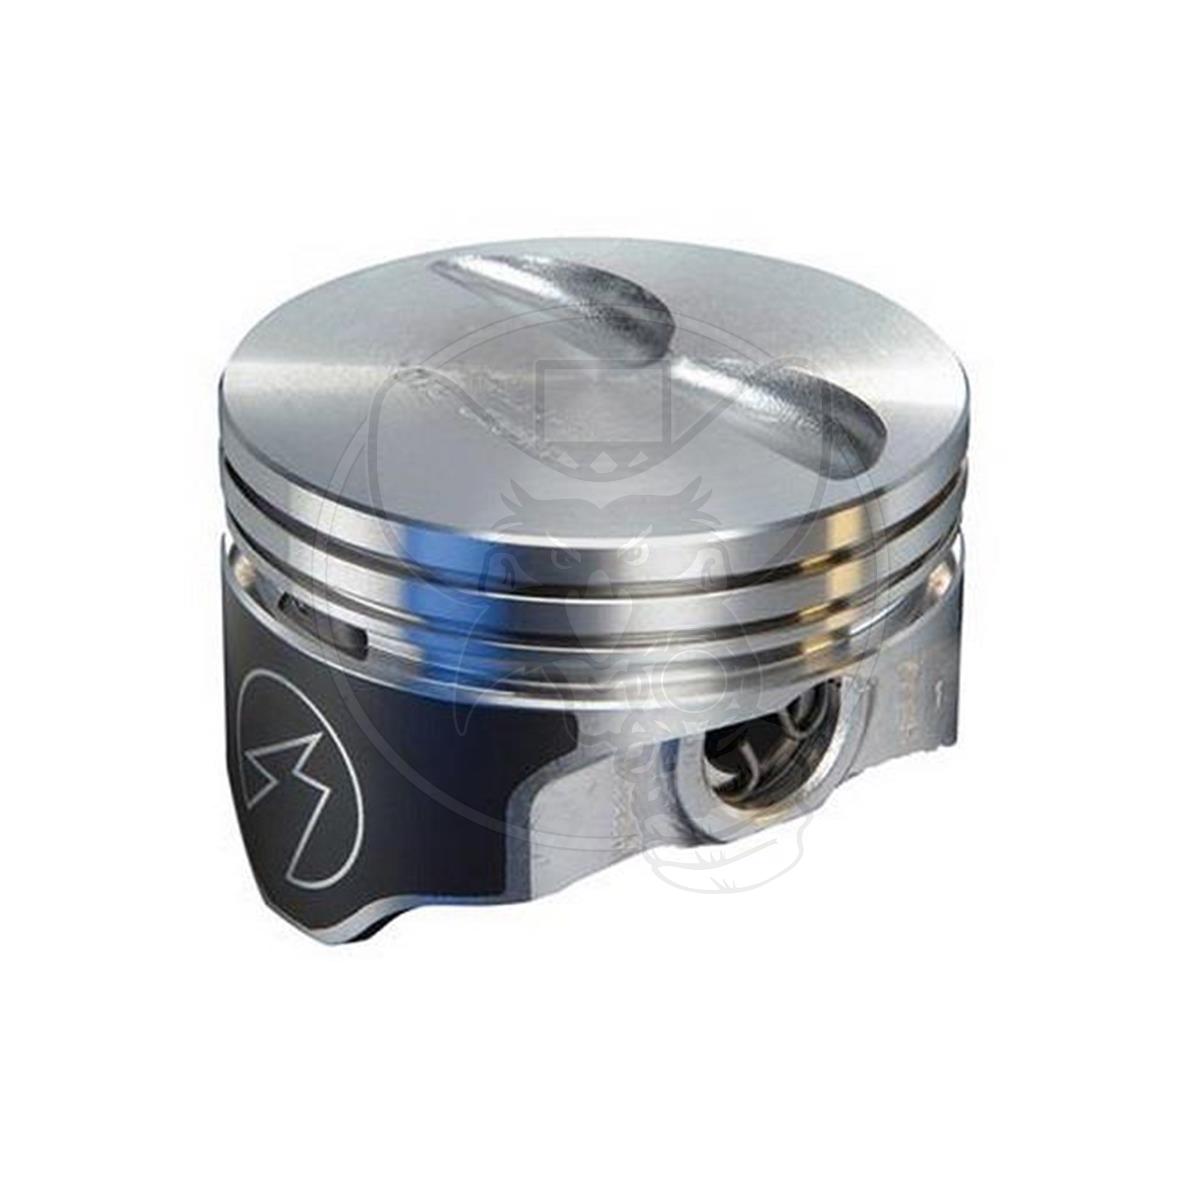 SPEED PRO PISTON SET FITS CHEV 383 WITH 5.7" ROD